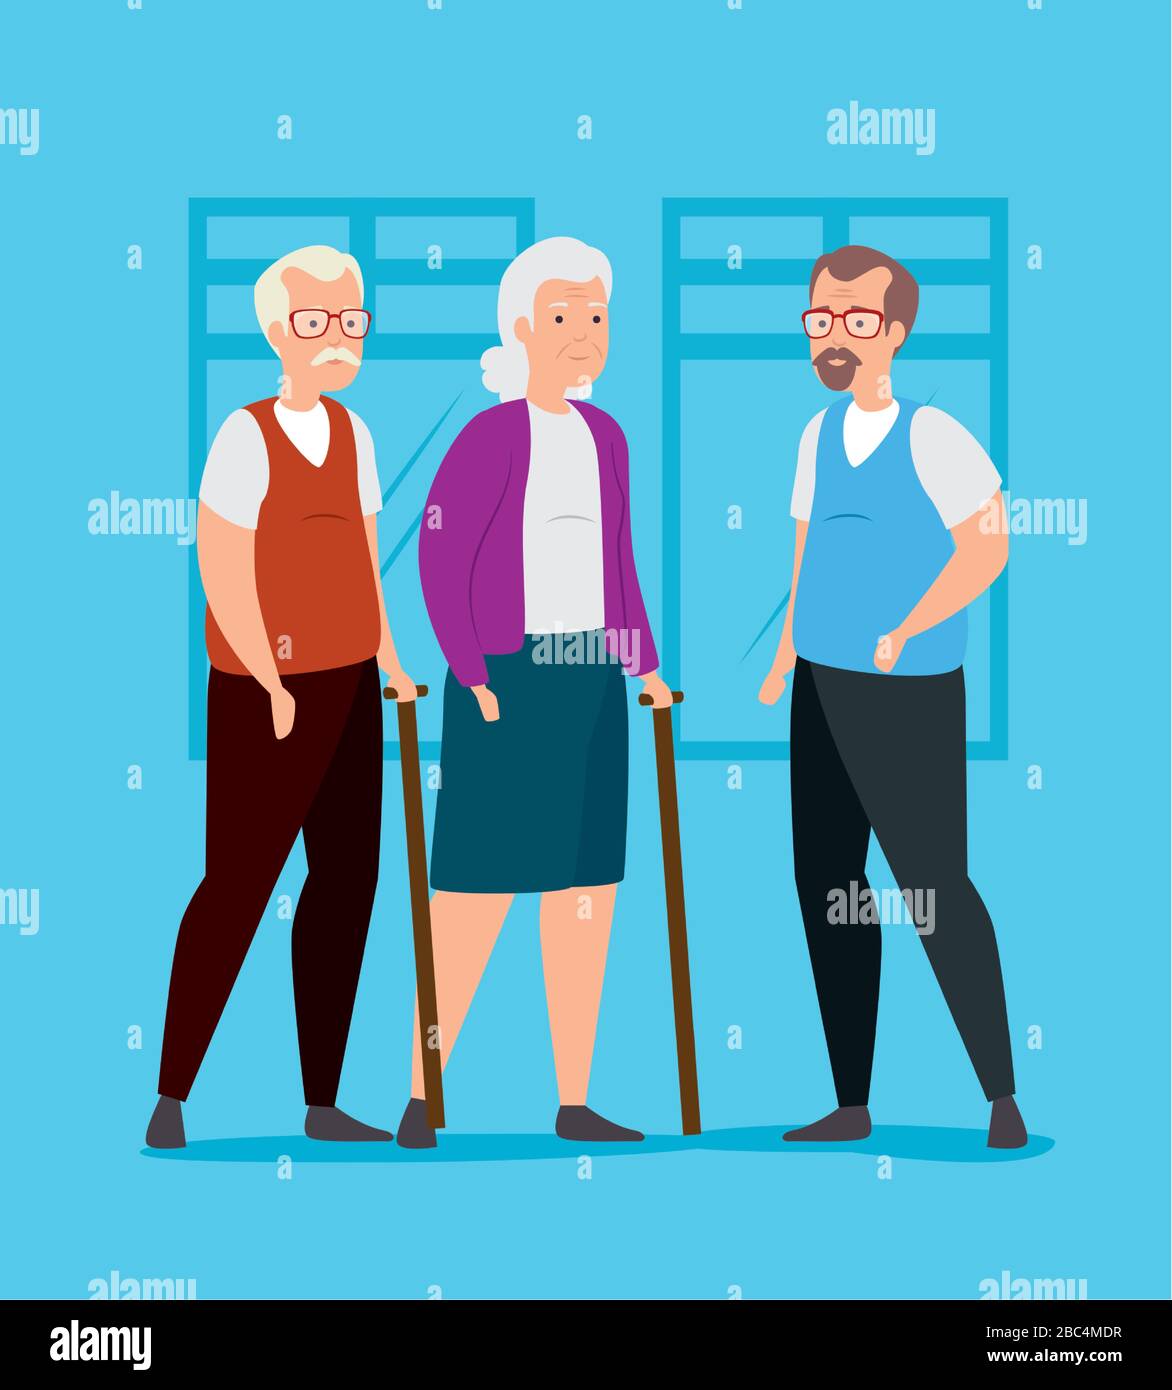 group of old people avatar character Stock Vector